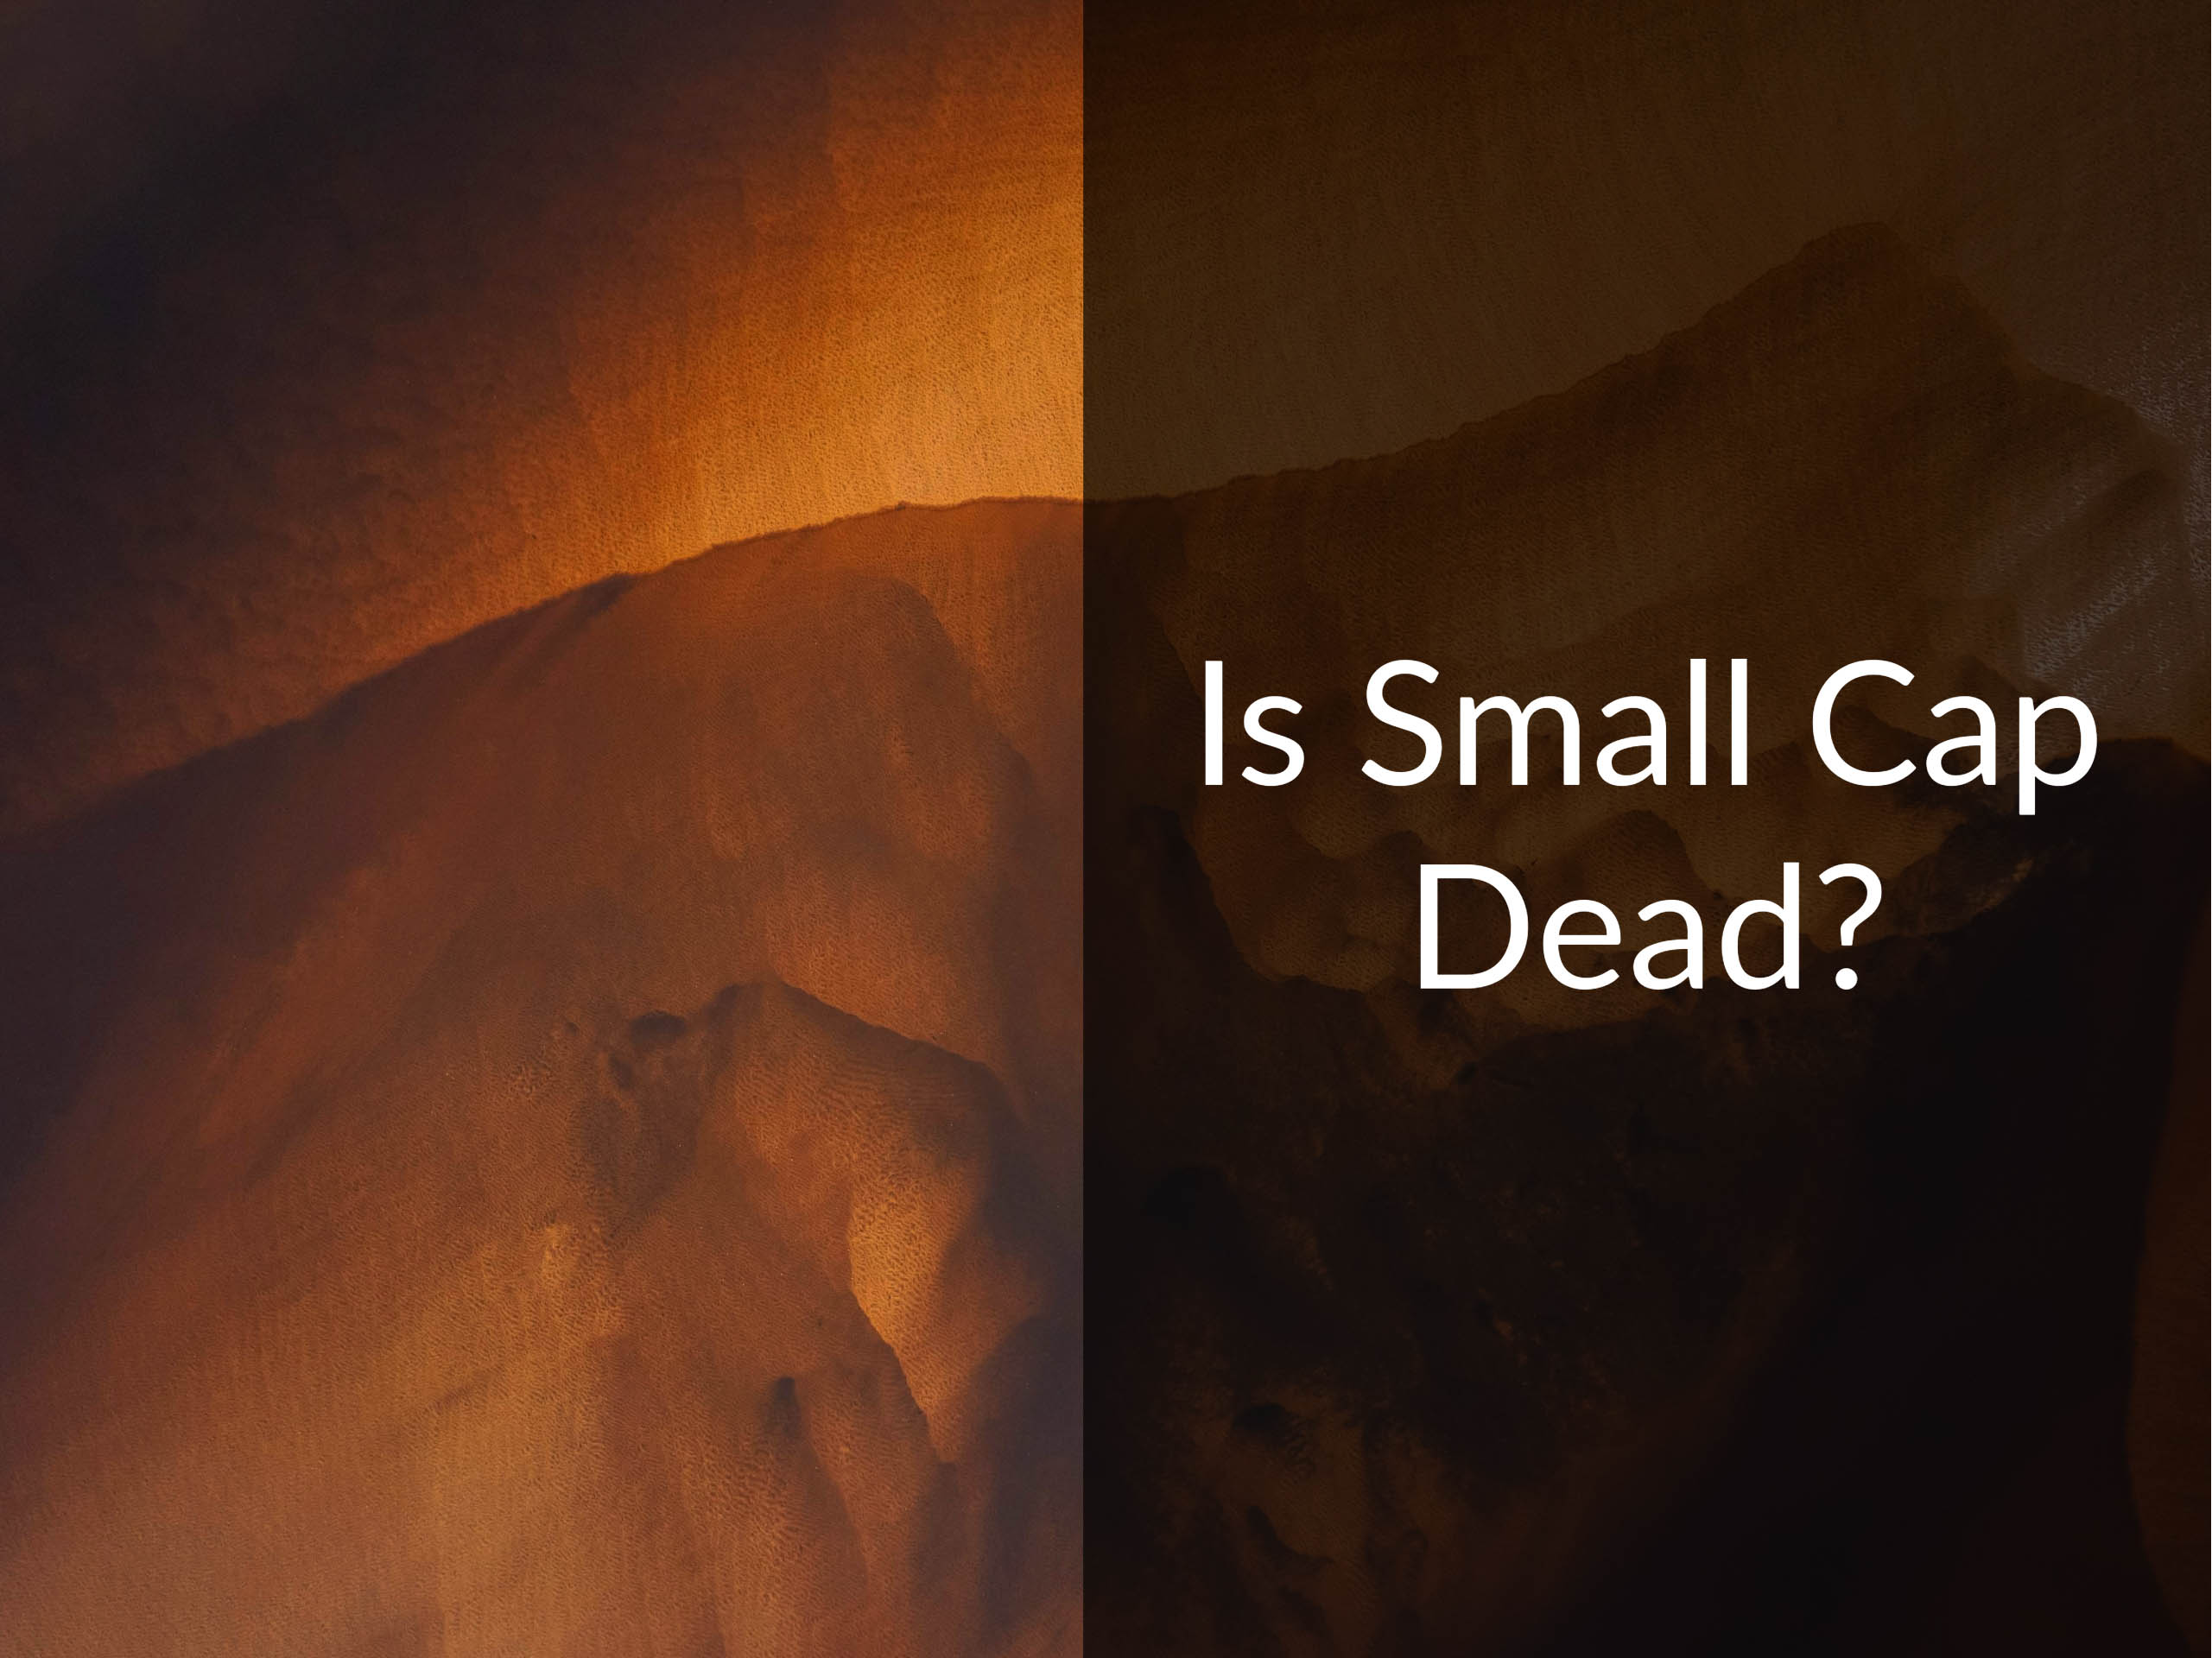 Abstract sand dunes from above. Caption says "Is Small Cap Dead?"